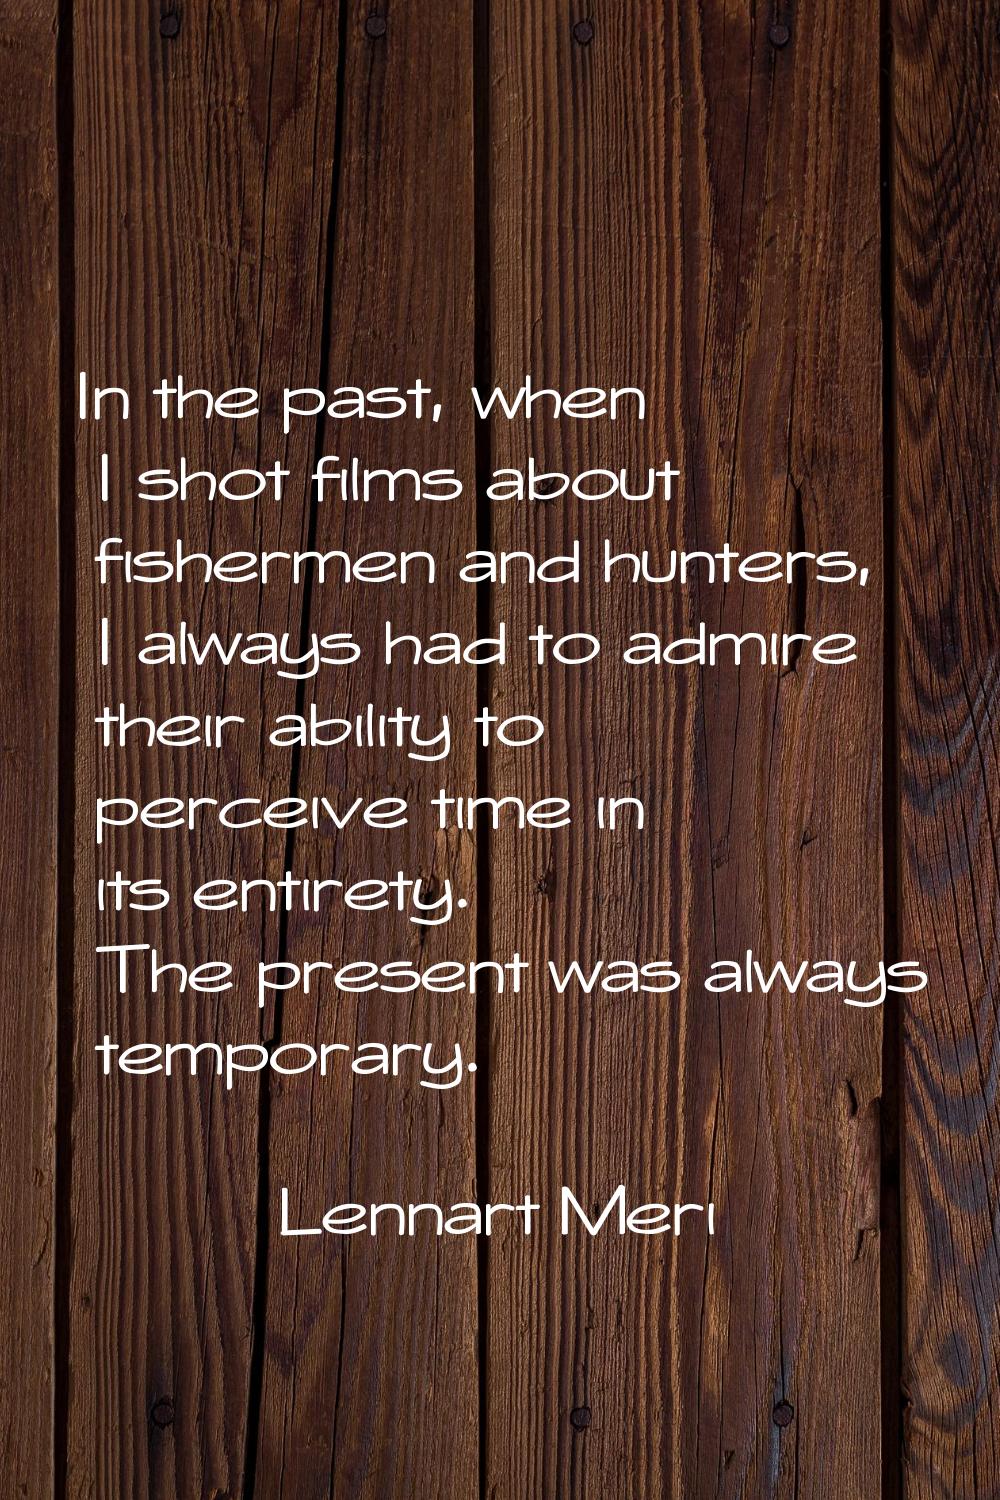 In the past, when I shot films about fishermen and hunters, I always had to admire their ability to